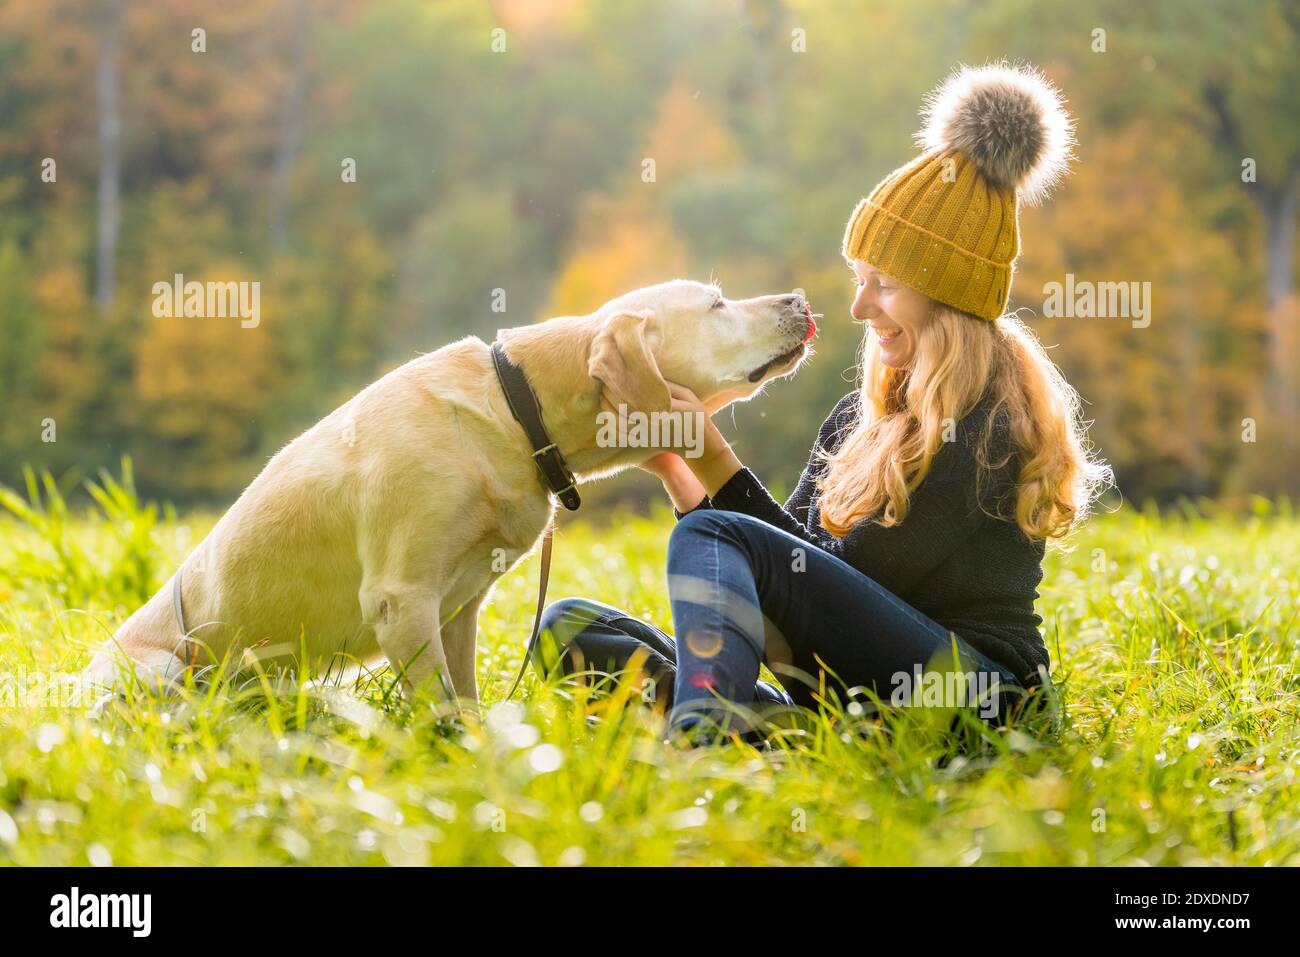 Happy woman playing with canine while sitting in park during autumn season Stock Photo